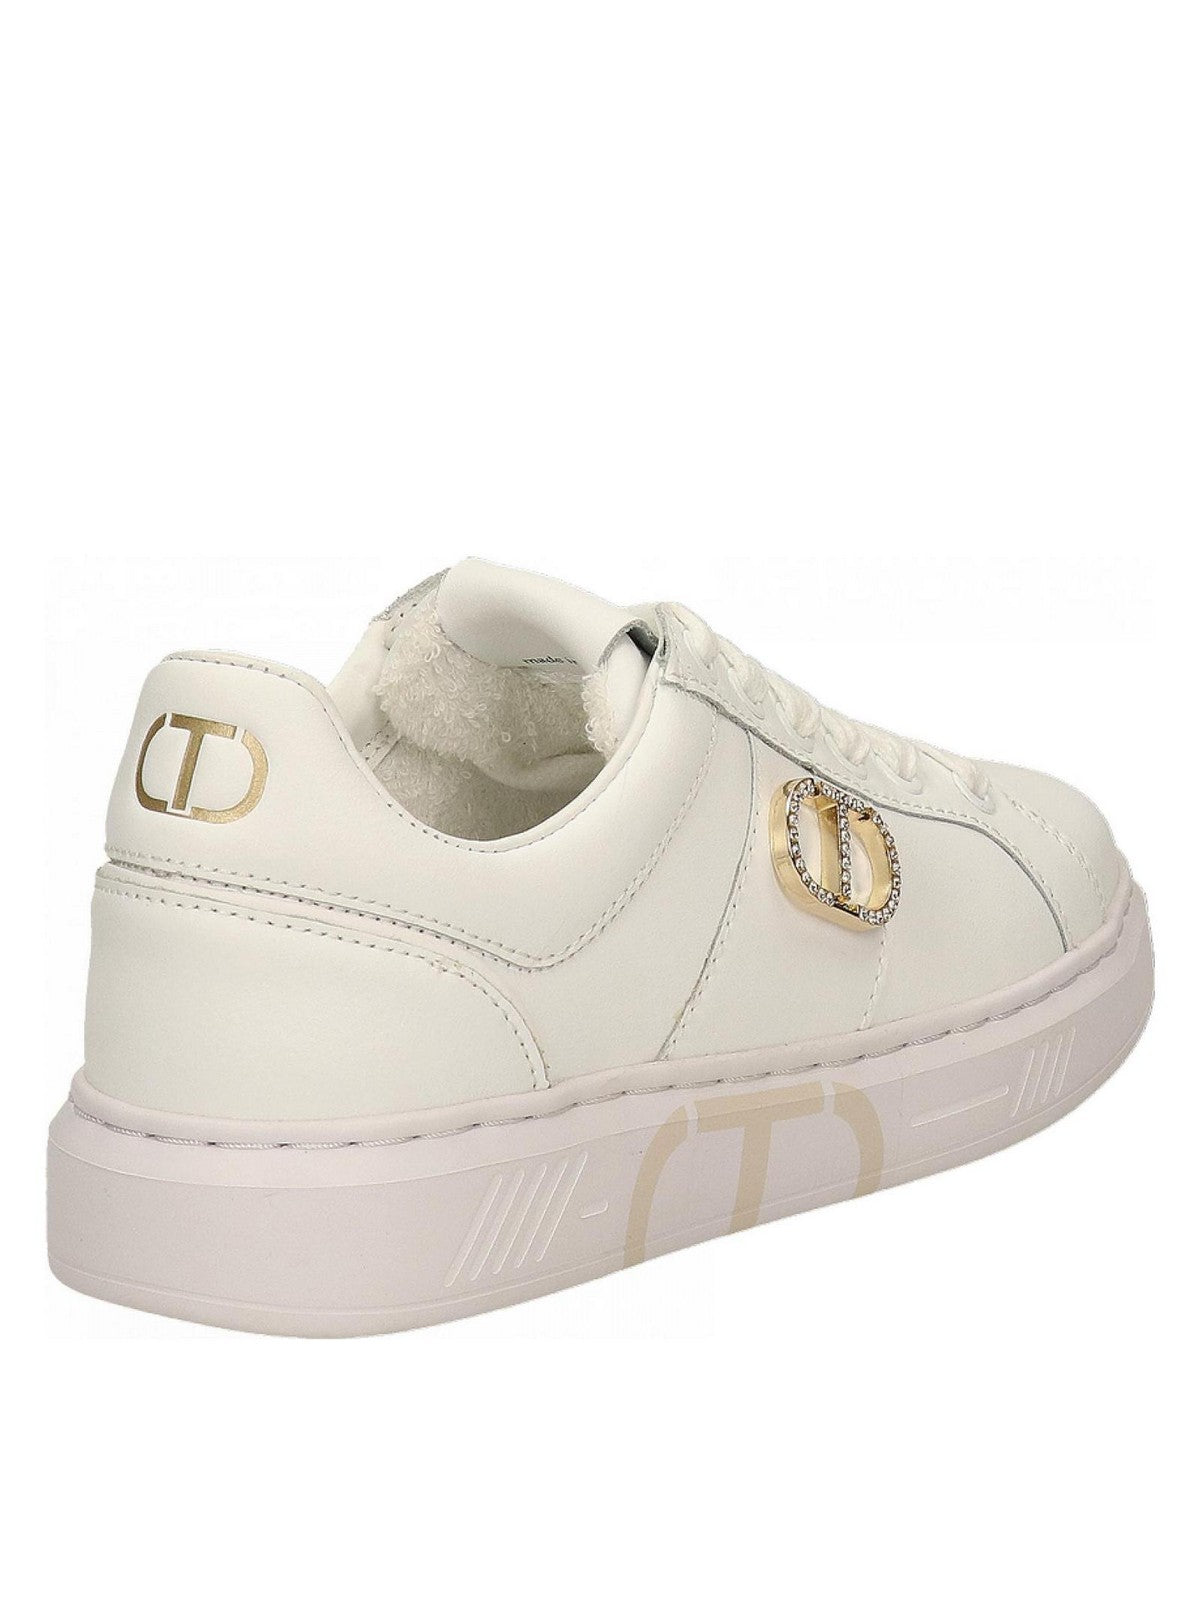 TWINSET Sneaker Donna  232TCP210 00001 Bianco